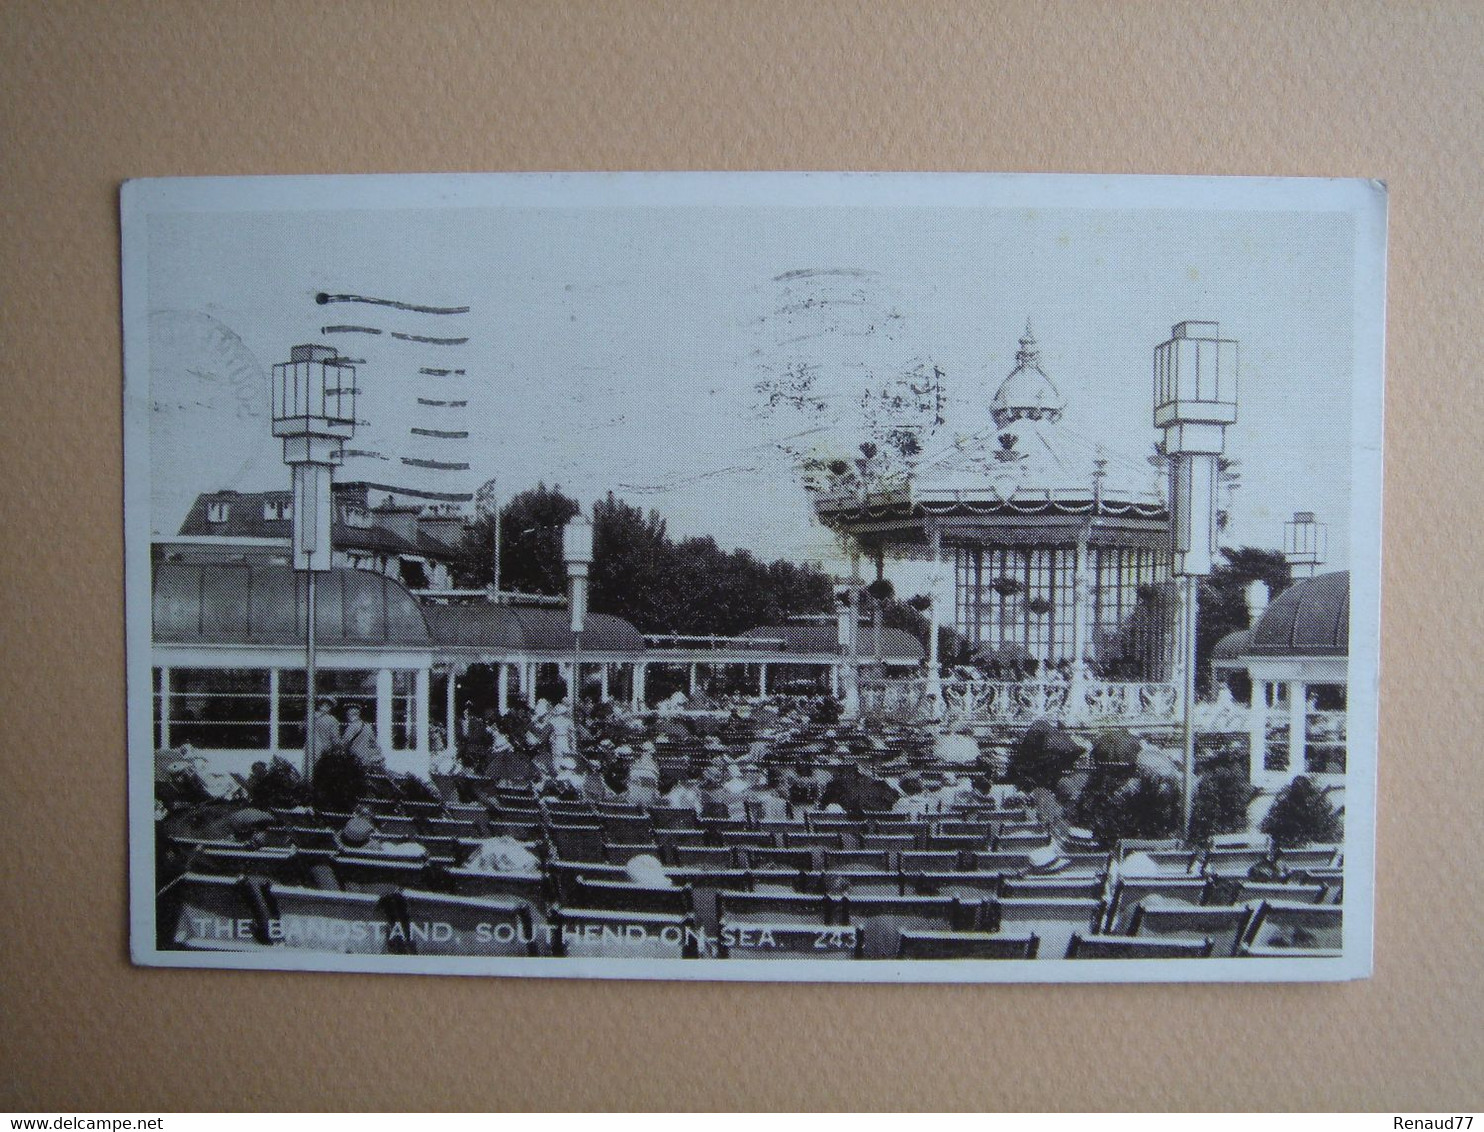 The Bandstand - Southend-on-Sea - Southend, Westcliff & Leigh